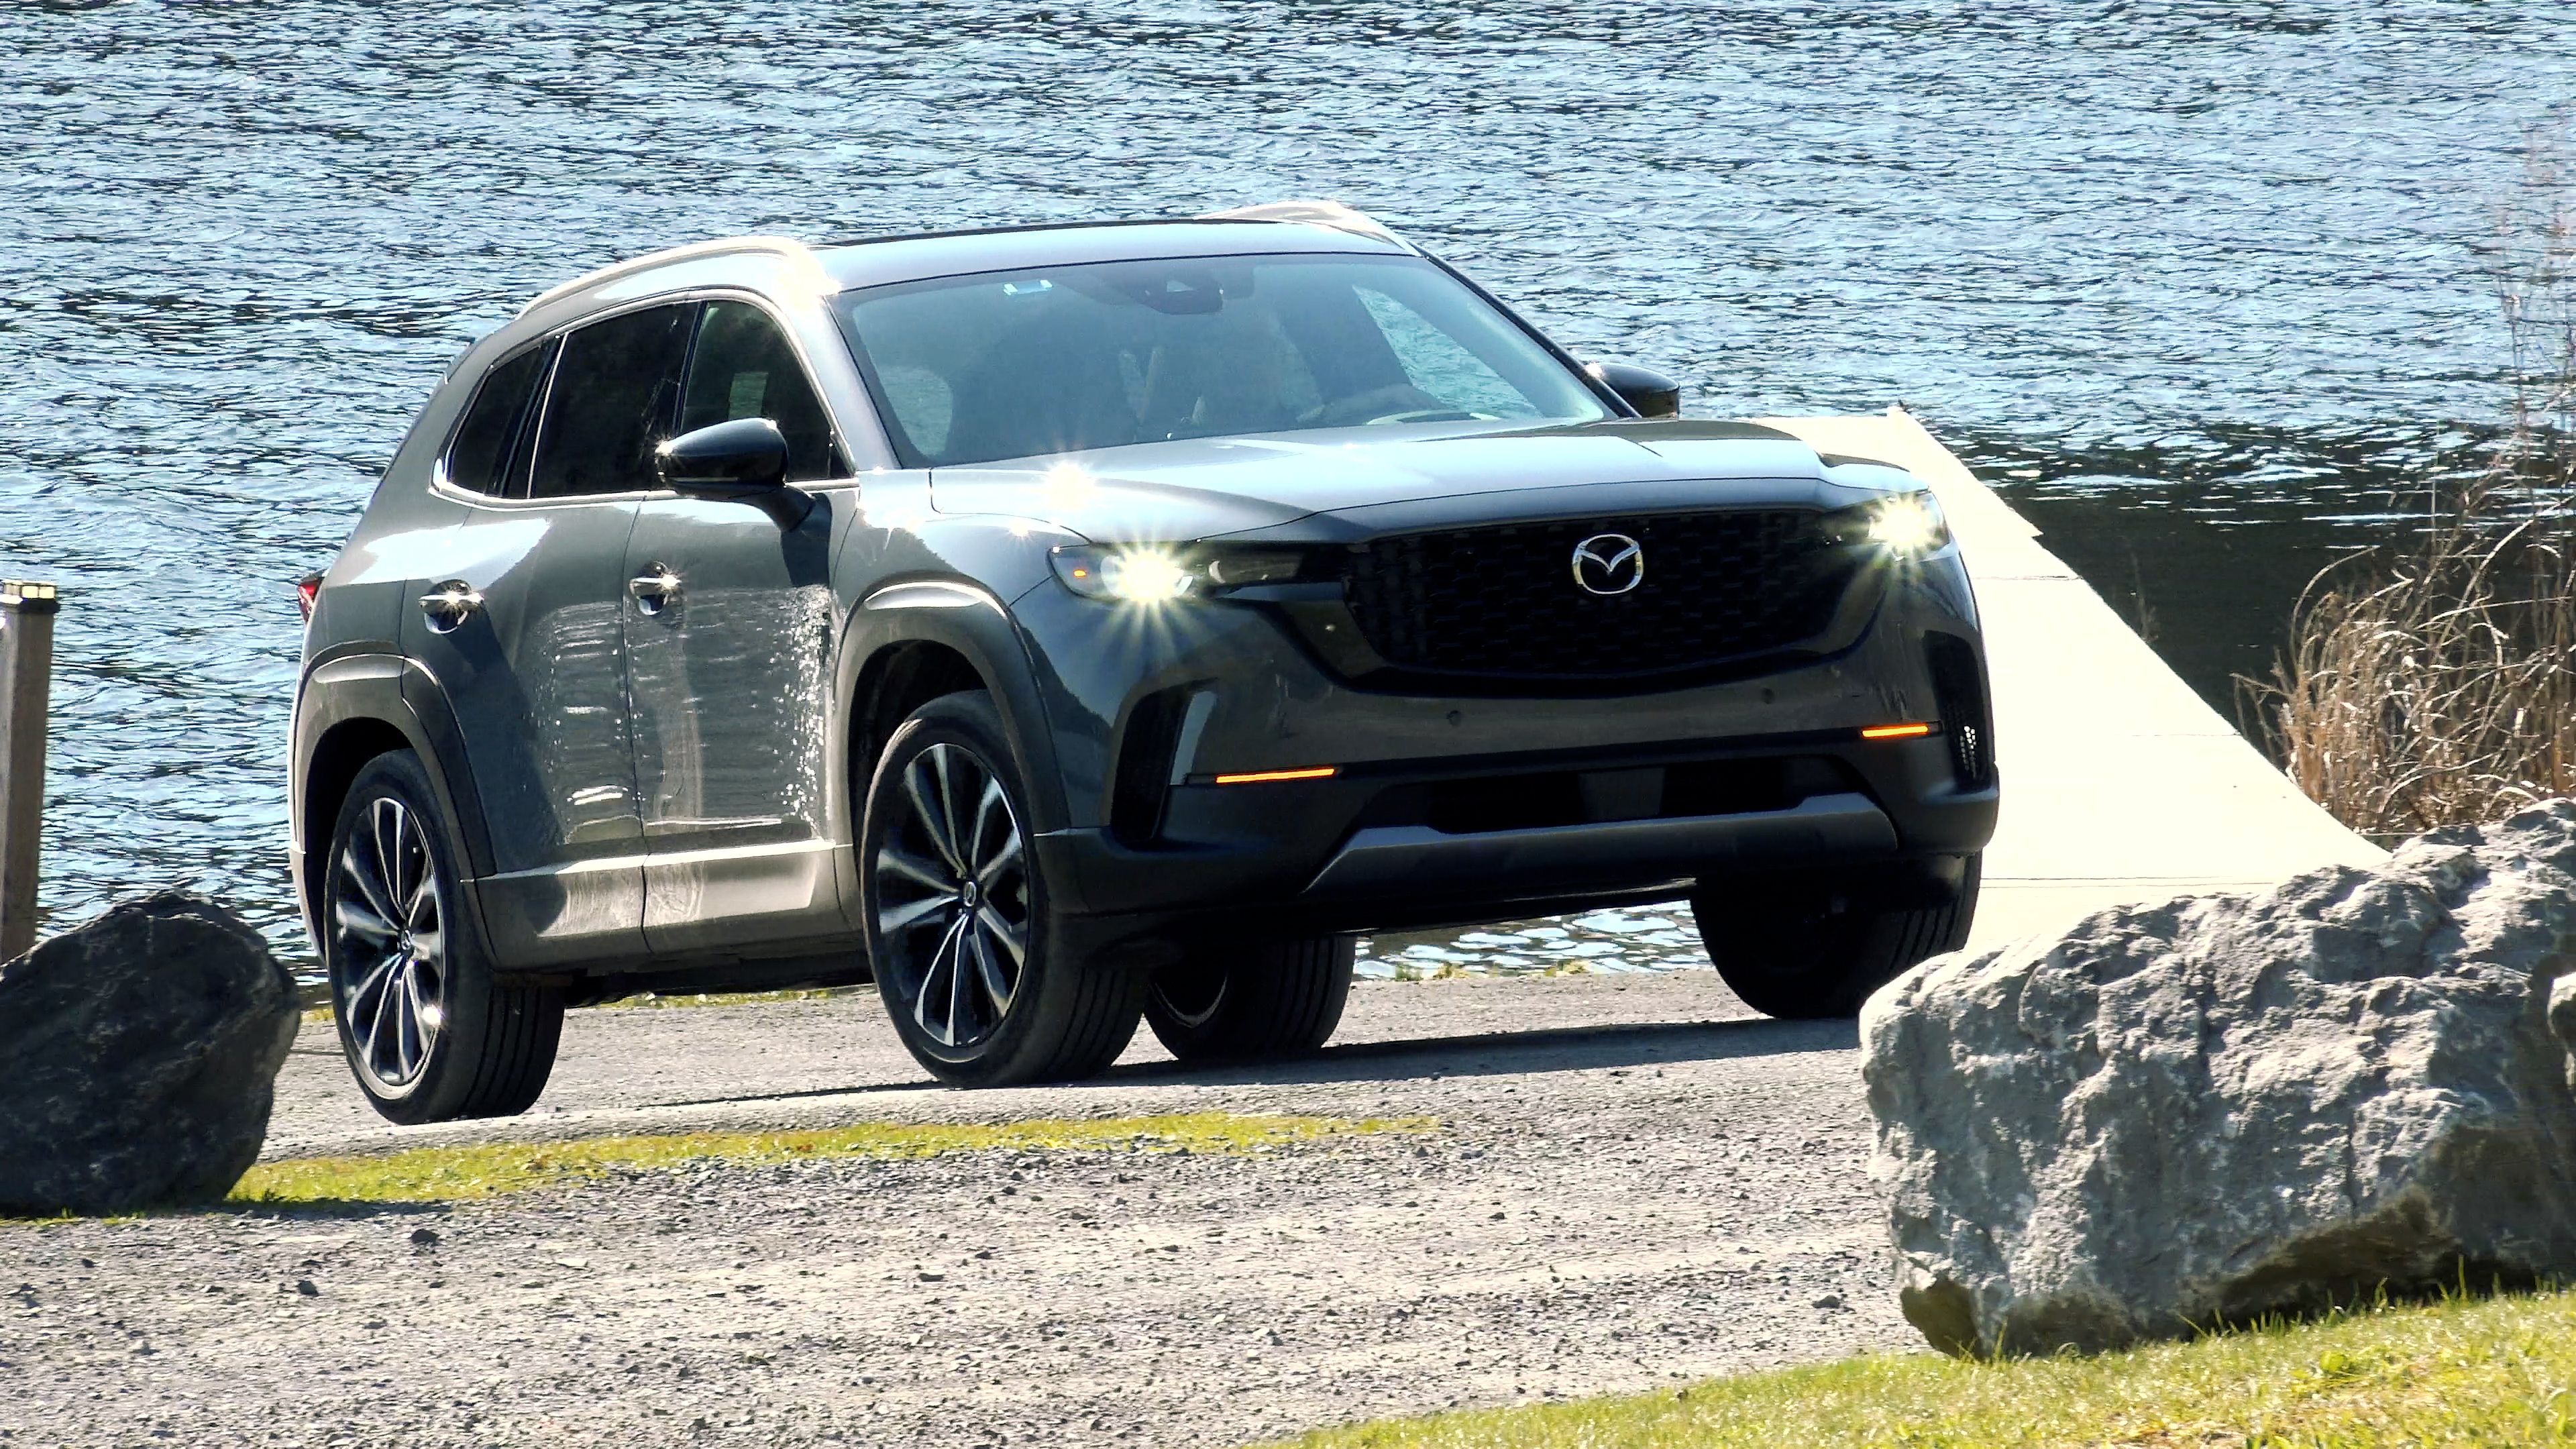 2023 Mazda CX-50 Review: Truly Rugged But Not Meant for Serious Off-Roading